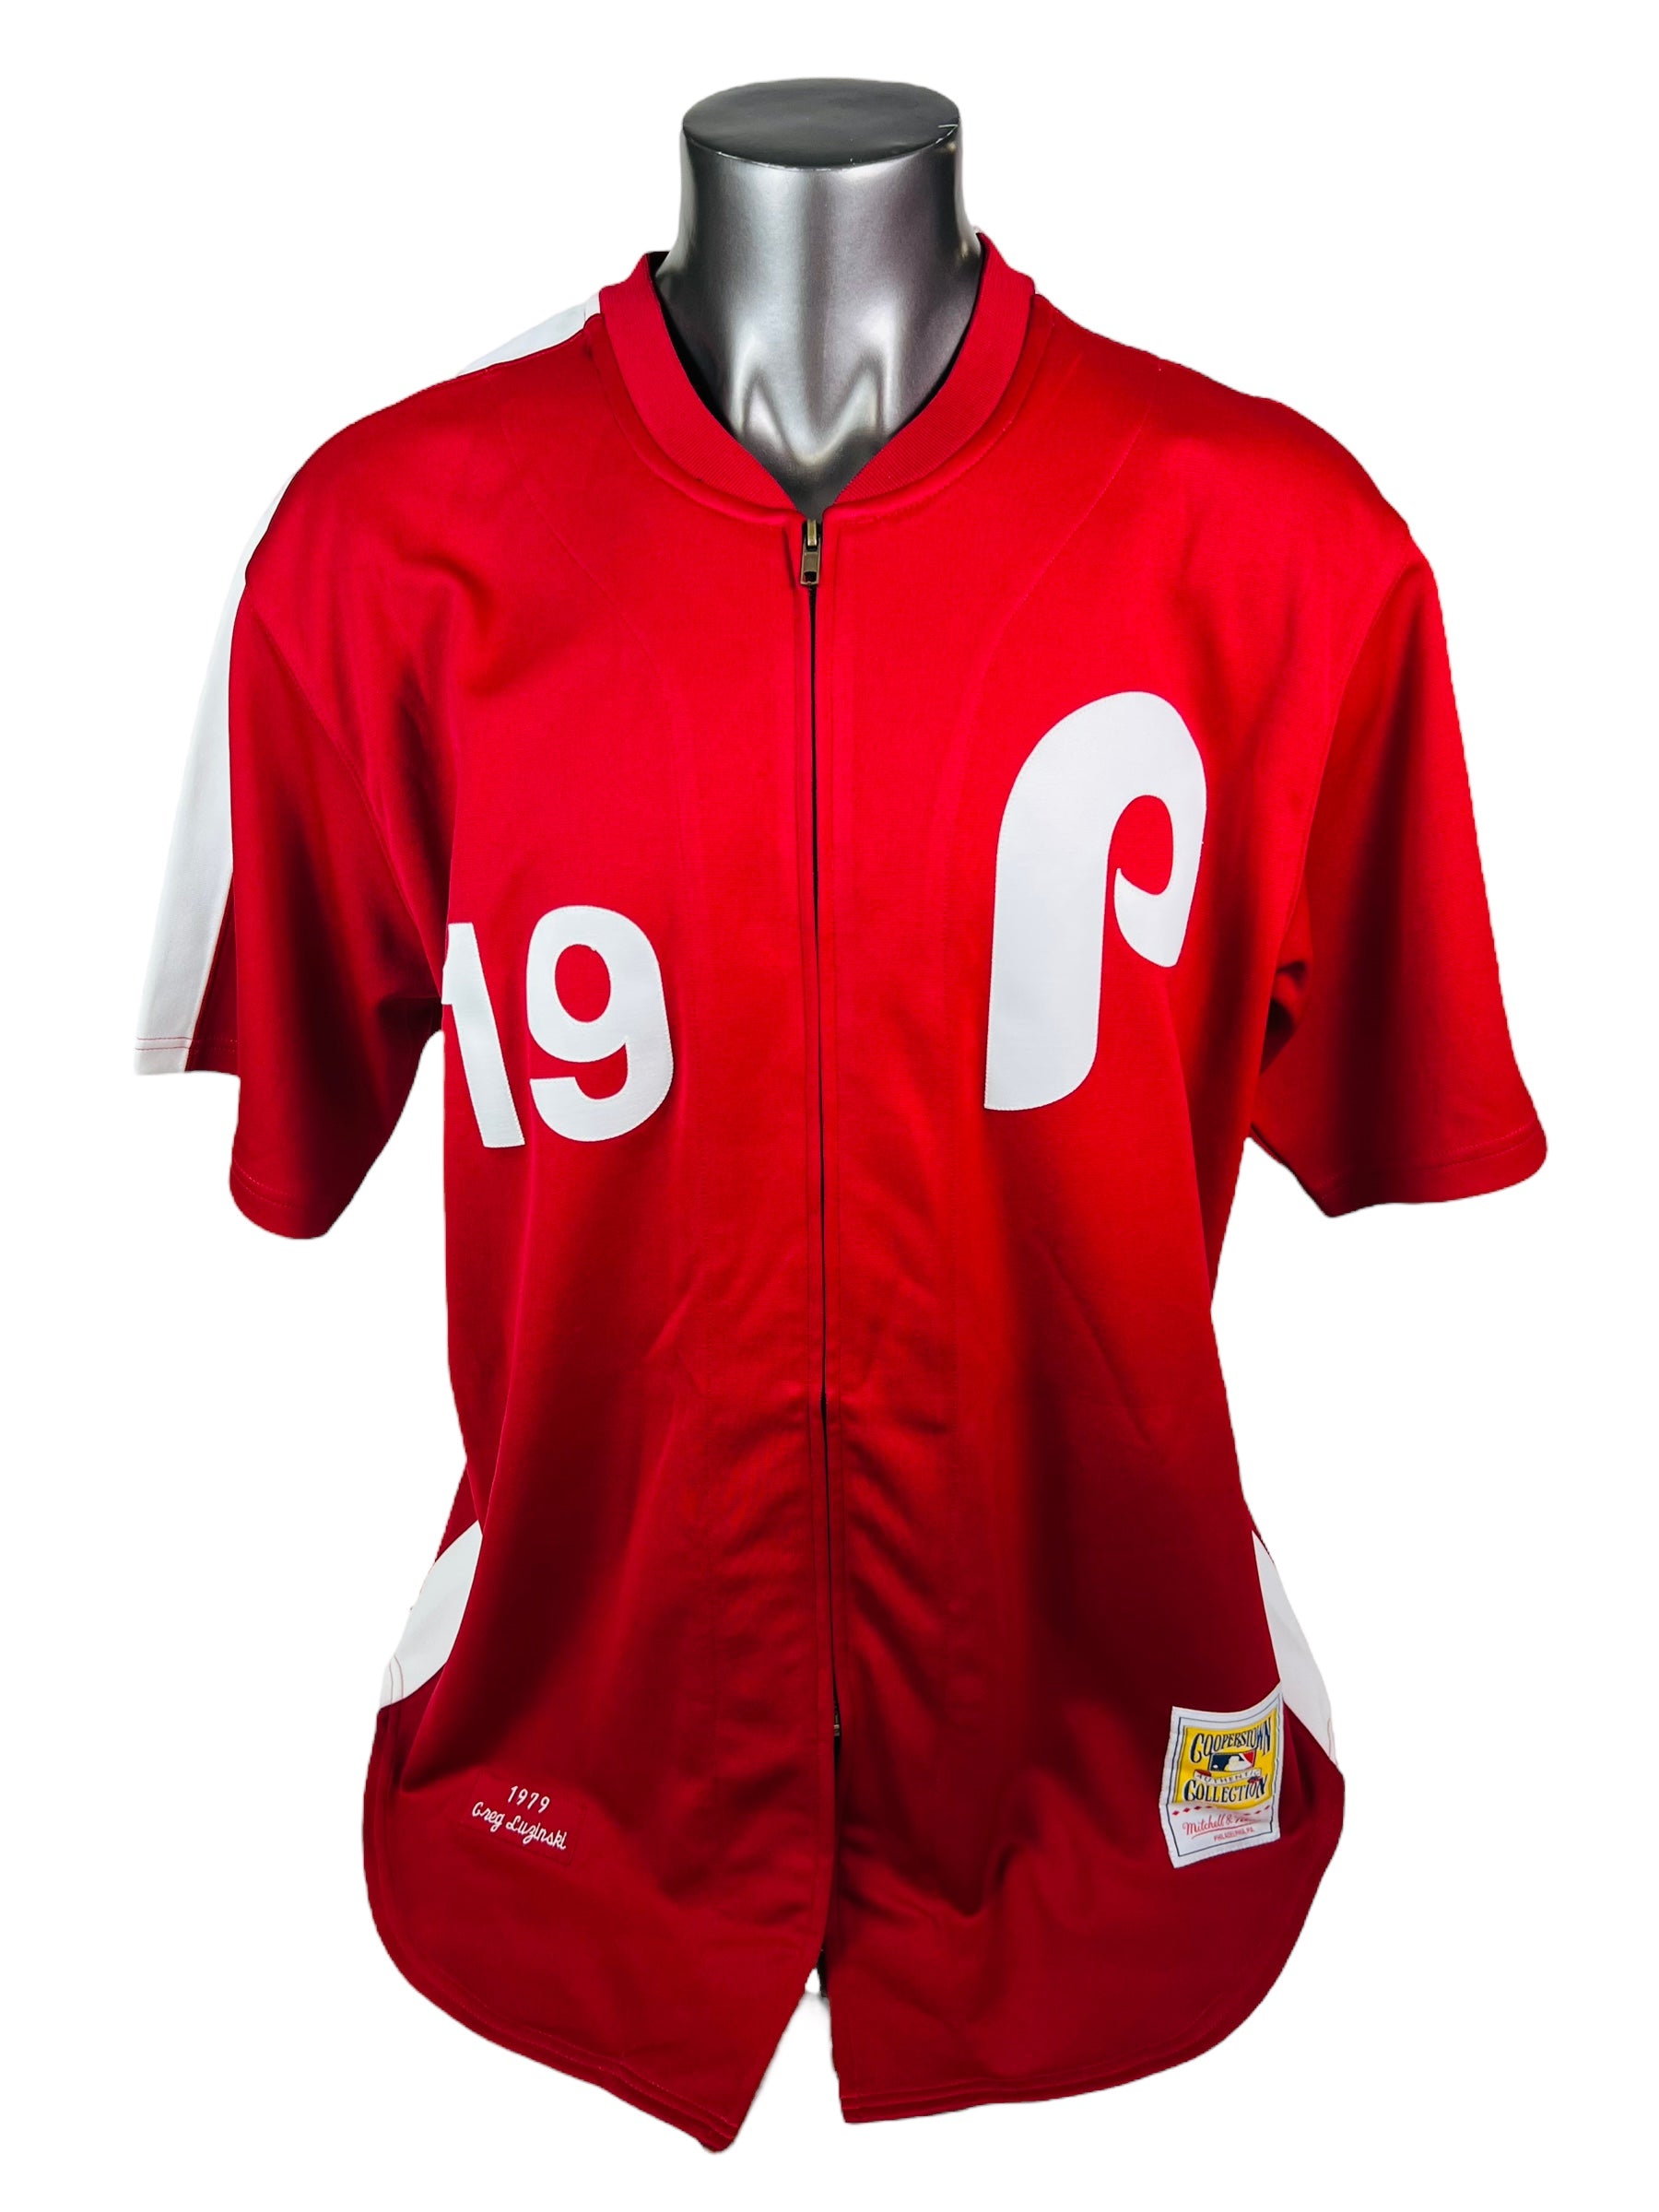 authentic throwback mlb jerseys